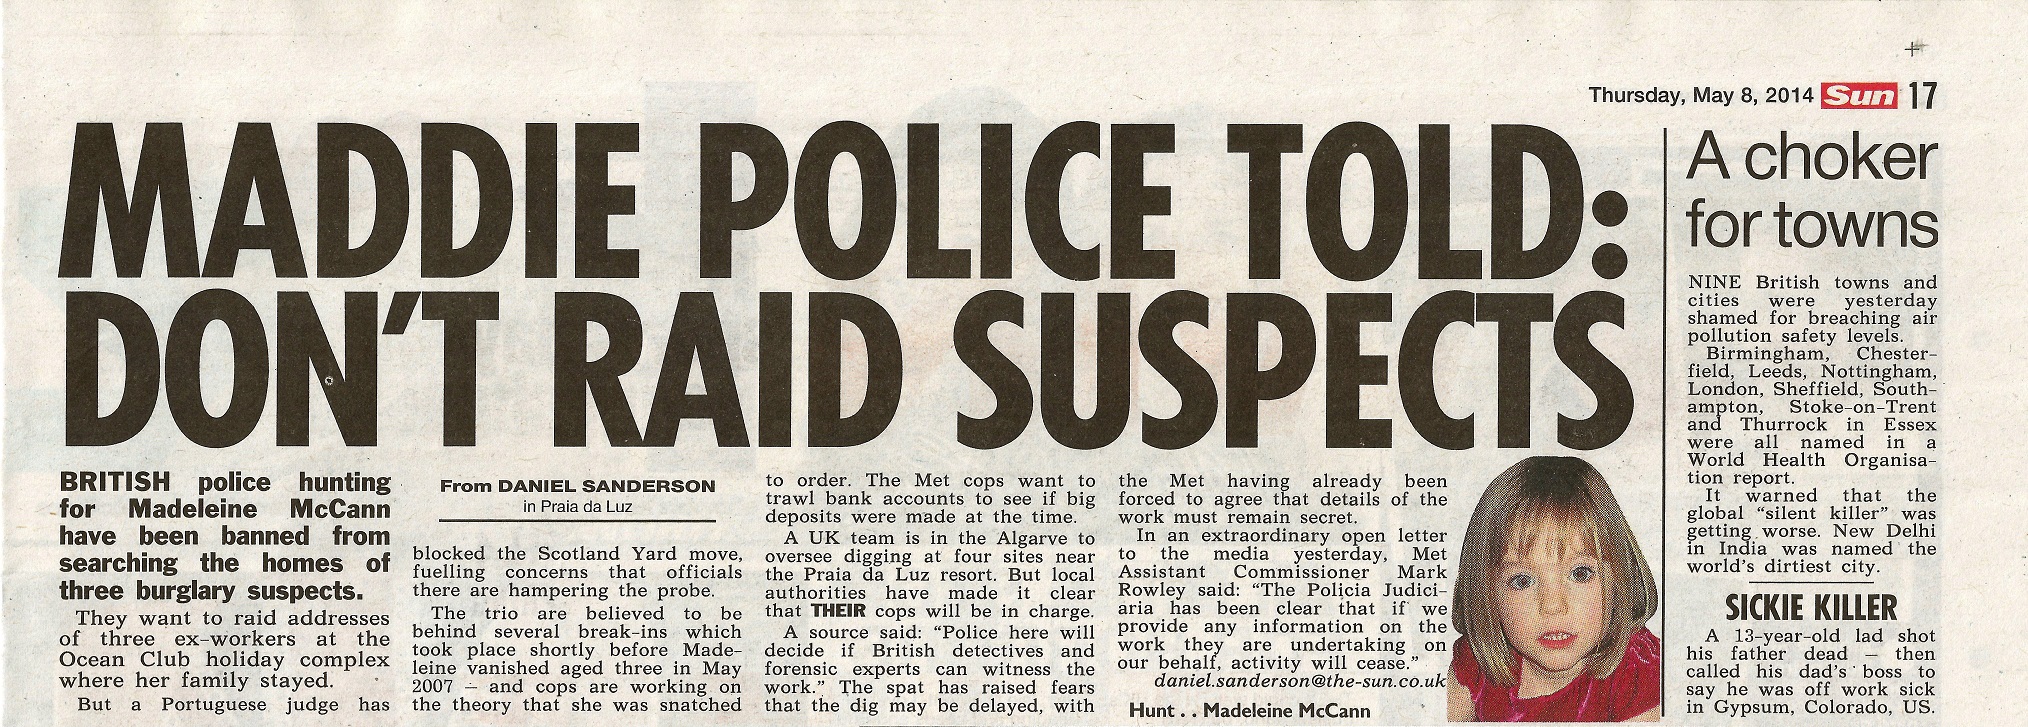 Maddie police told: Don't raid suspects - The Sun (paper edition, page 17)